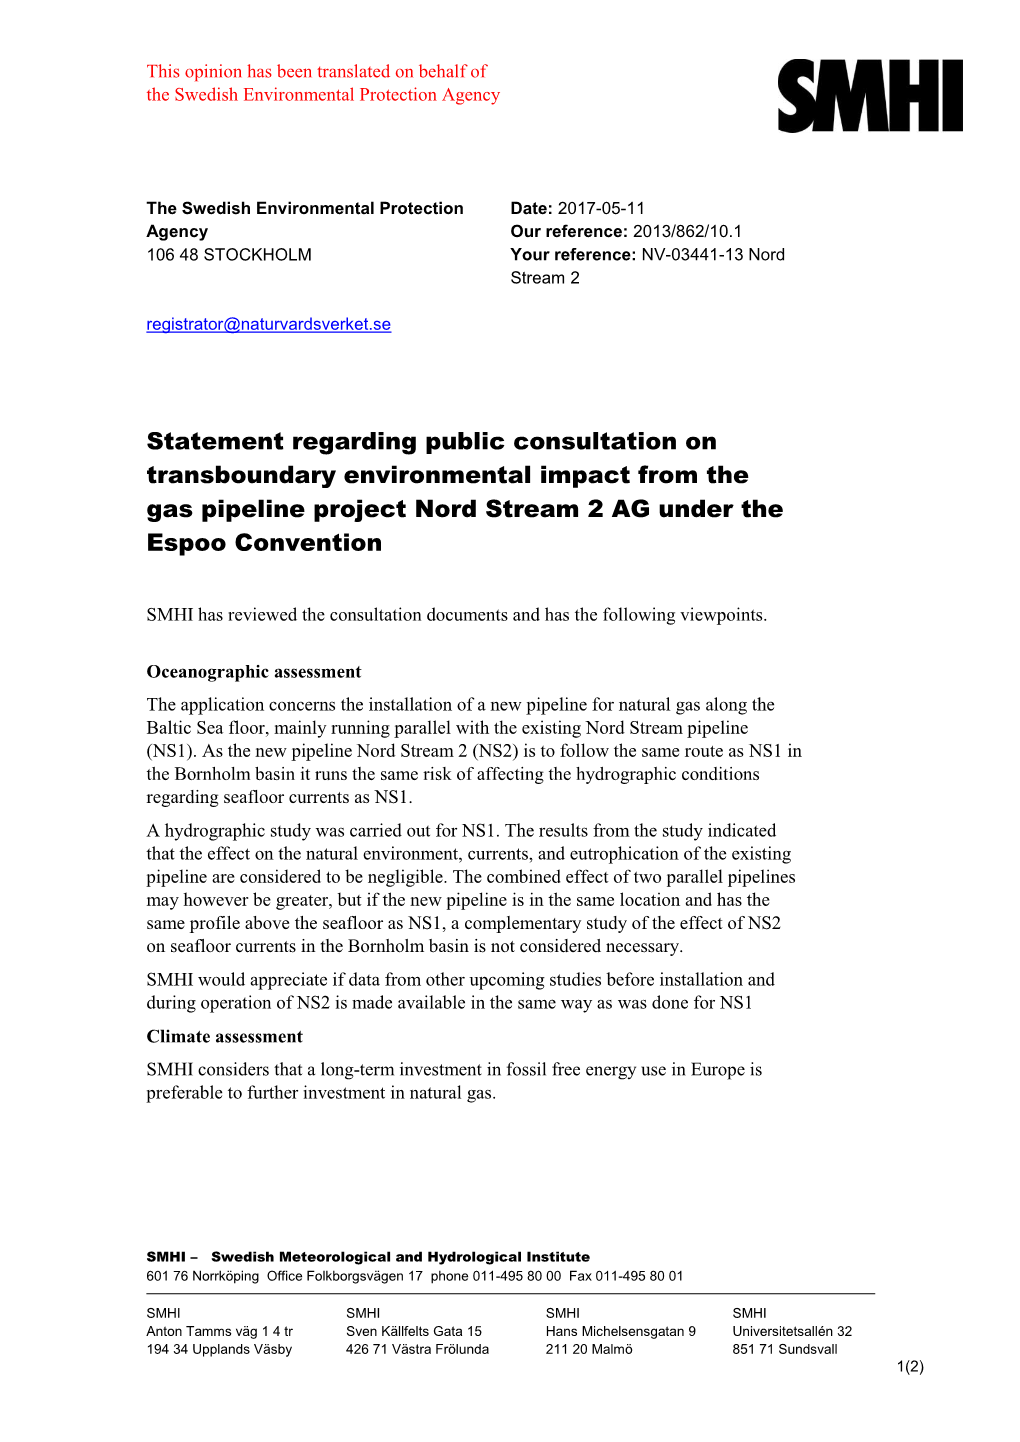 Statement Regarding Public Consultation on Transboundary Environmental Impact from the Gas Pipeline Project Nord Stream 2 AG Under the Espoo Convention